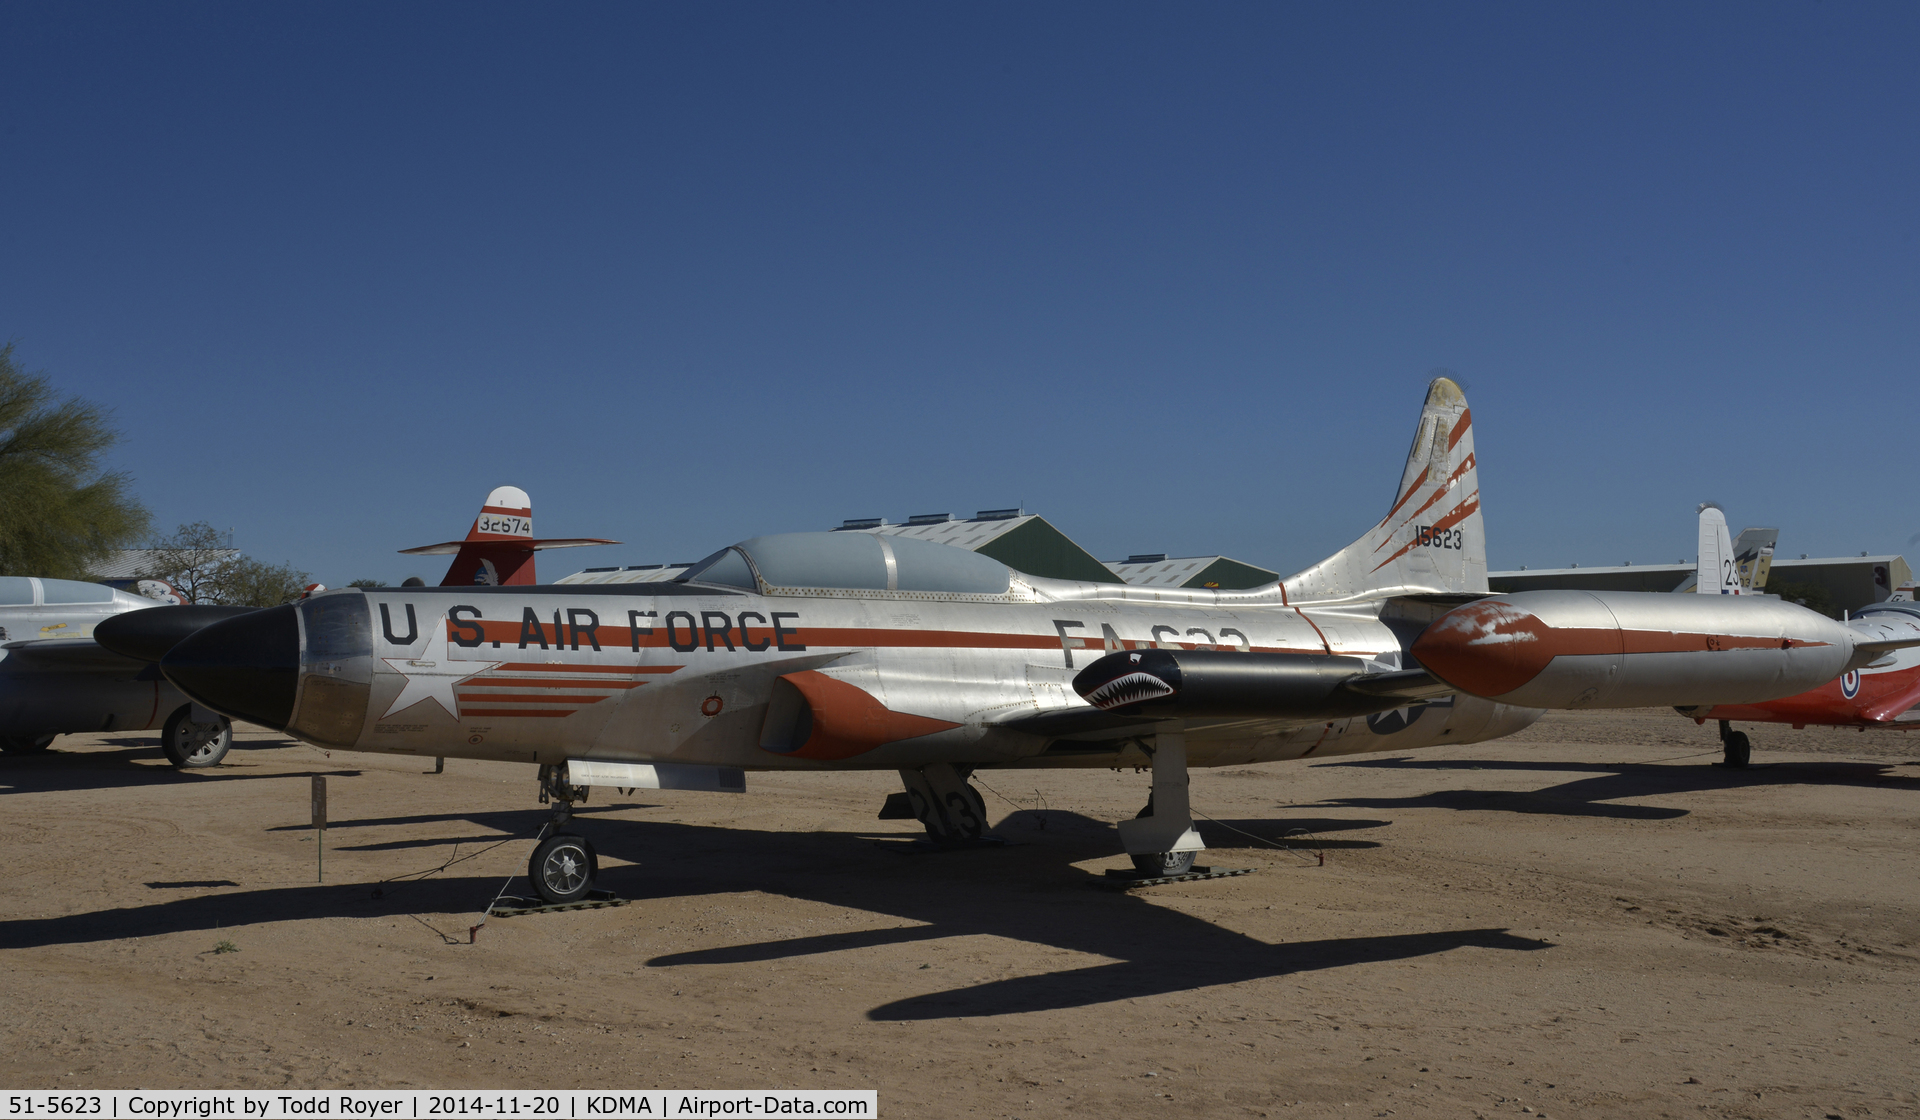 51-5623, 1951 Lockheed F-94C Starfire C/N 880-8219, On display at the Pima Air and Space Museum